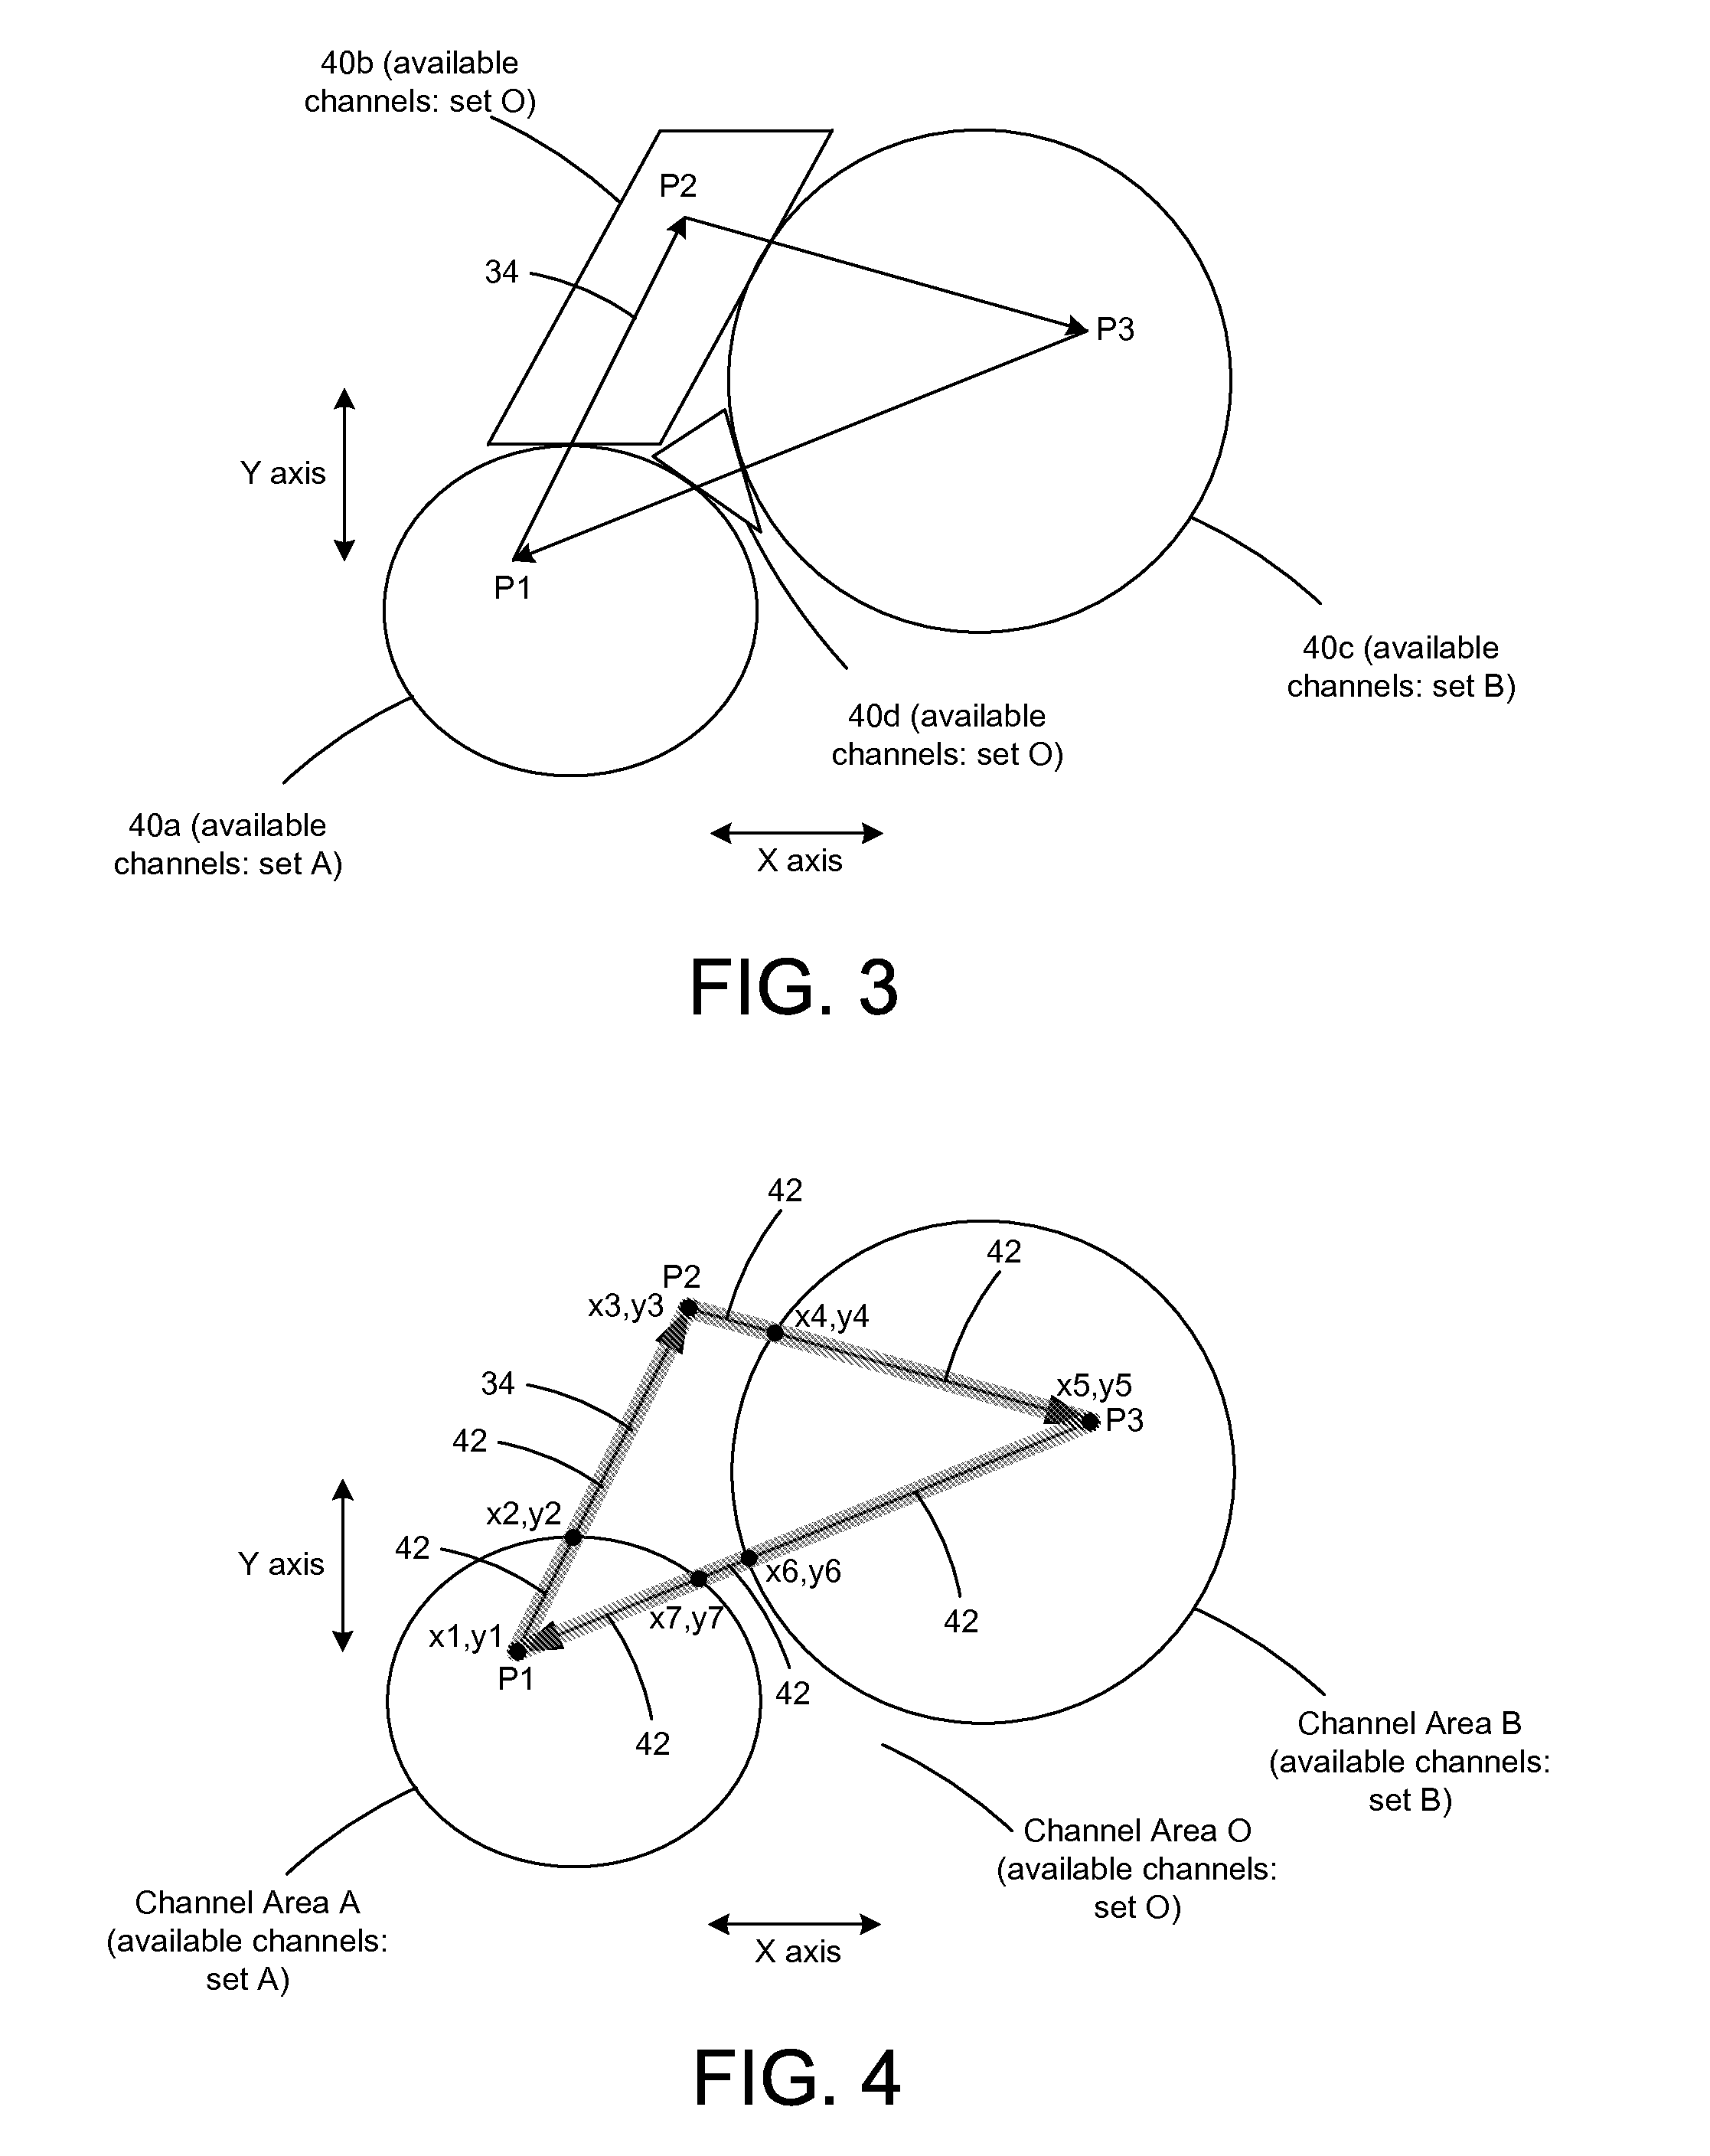 Systems and methods for determining and specifying spectrum availability for a predetermined travel route